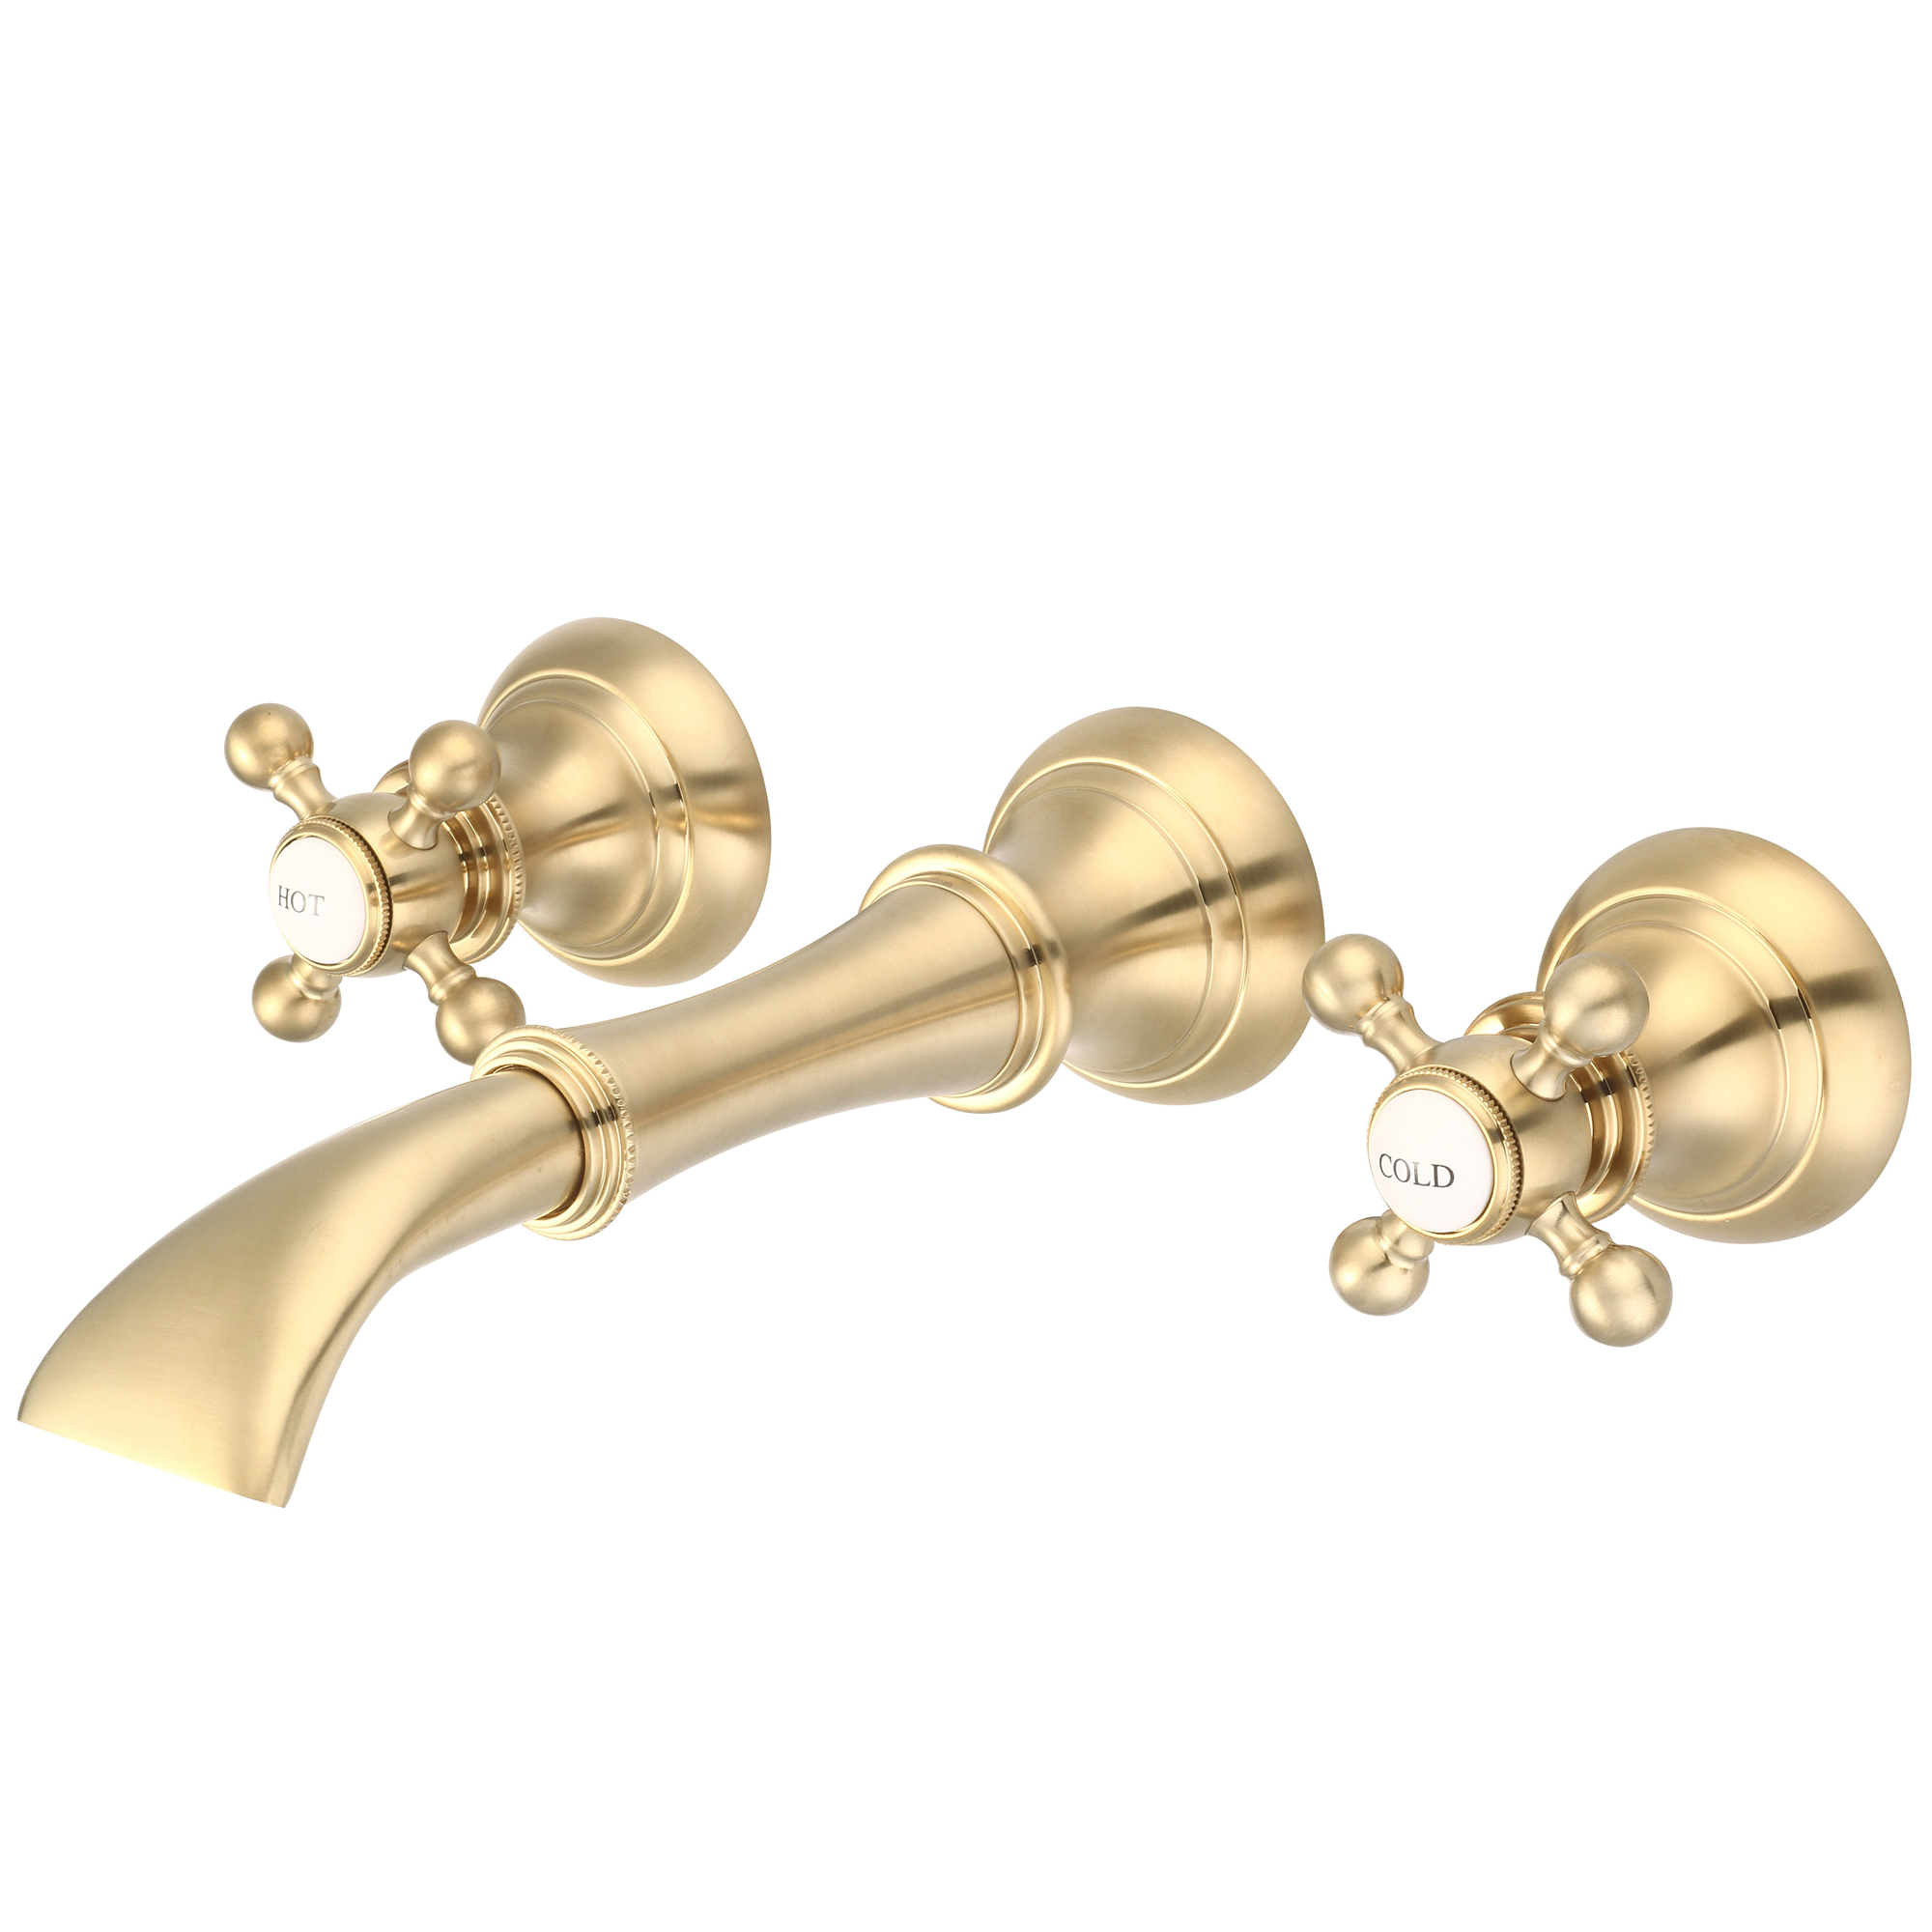 Waterfall Style Wall-mounted Lavatory Faucet in Satin Gold Finish